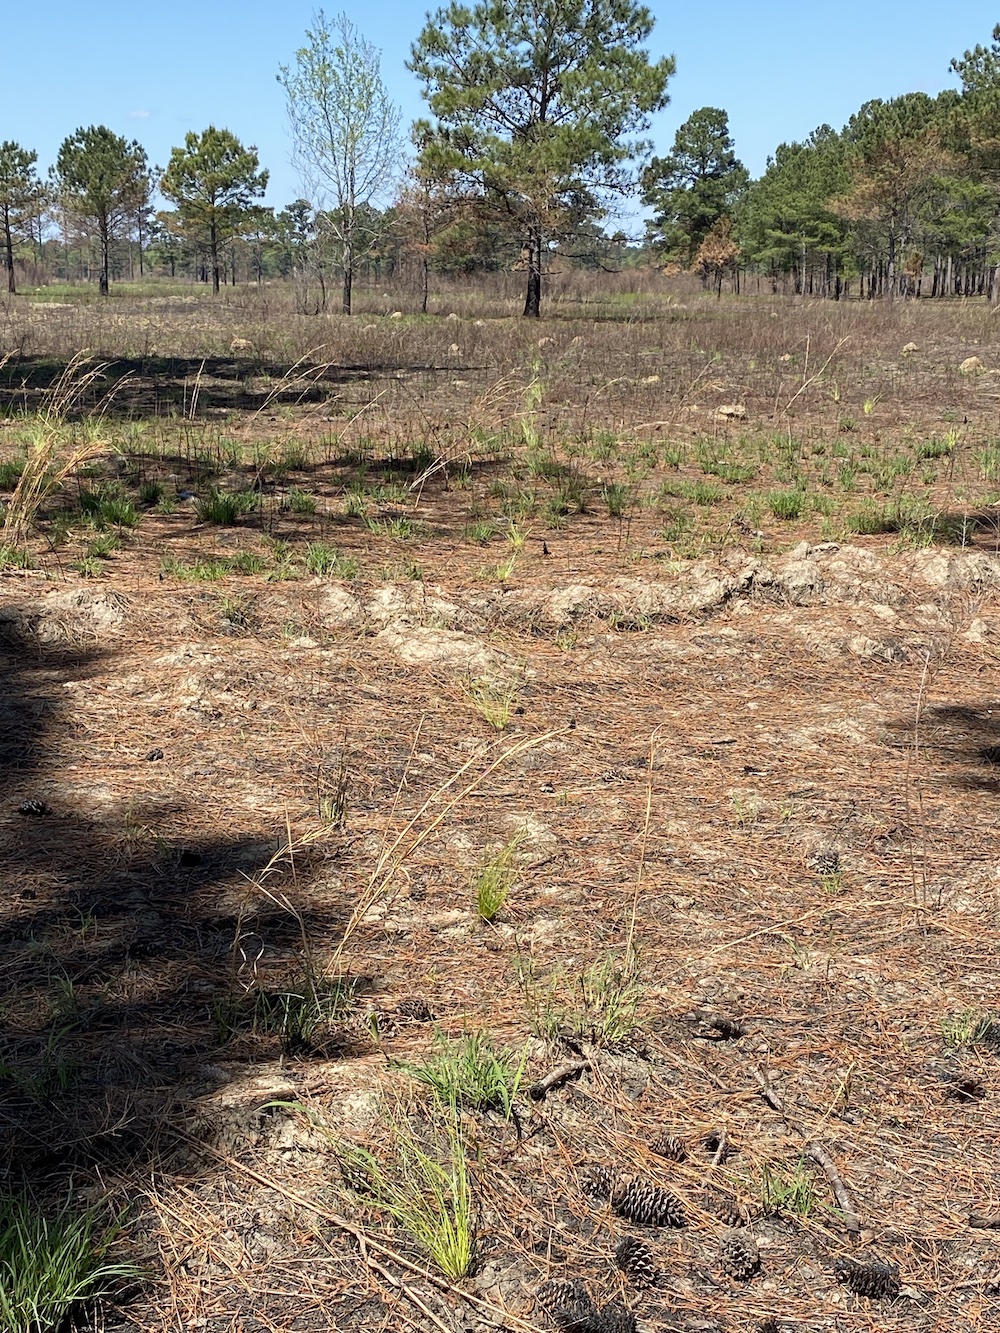 In March, GreenTrees launched South Carolina’s first-ever reforestation project for generating carbon credits, planting 280,000 longleaf pine trees on 511 total acres in Williamsburg County.